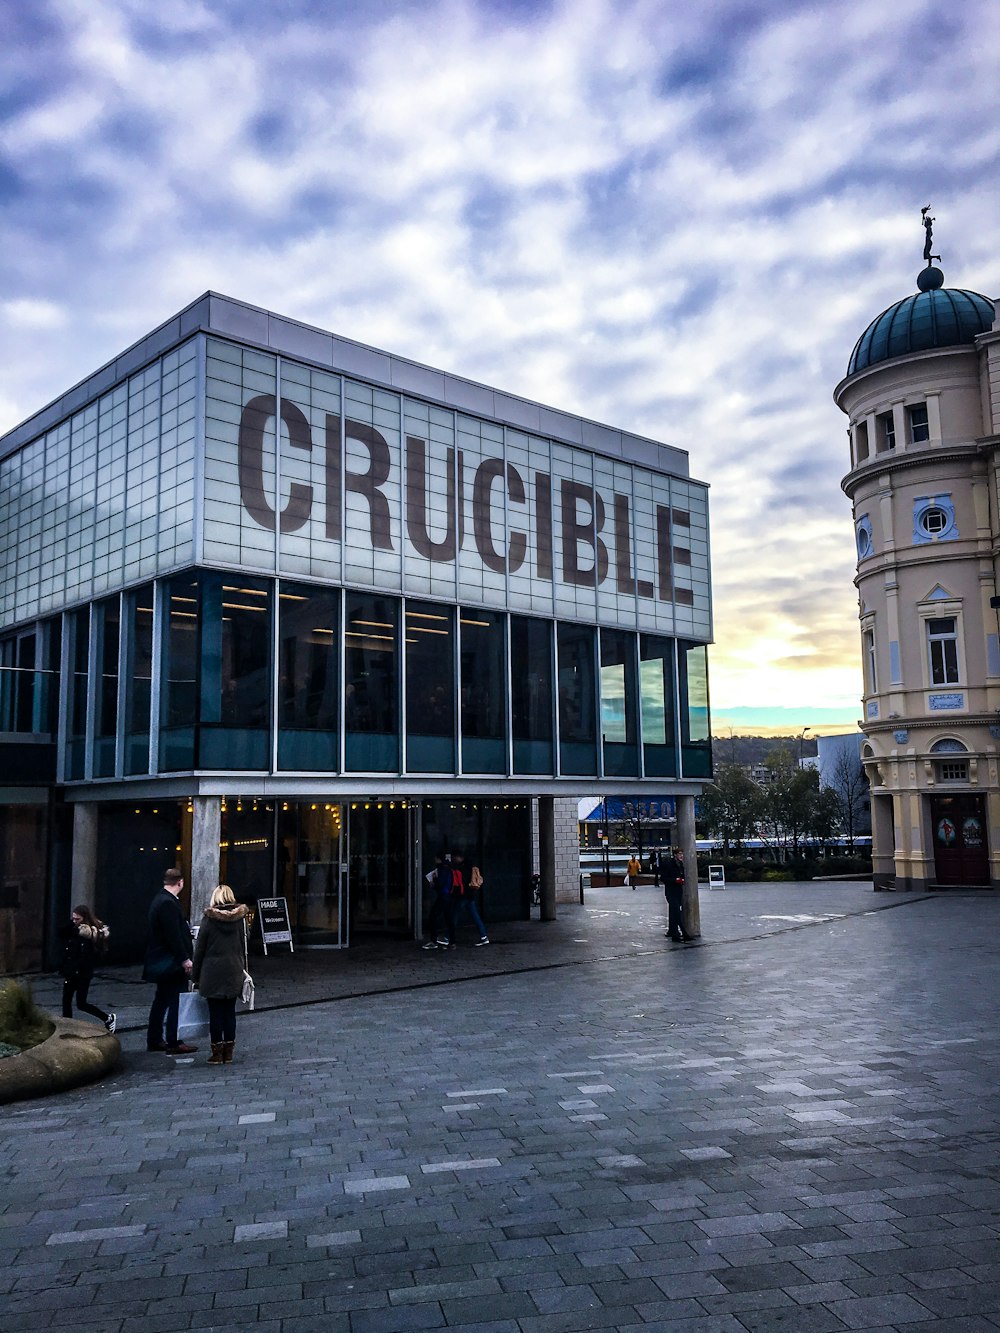 white and brown Crucible signage during daytime